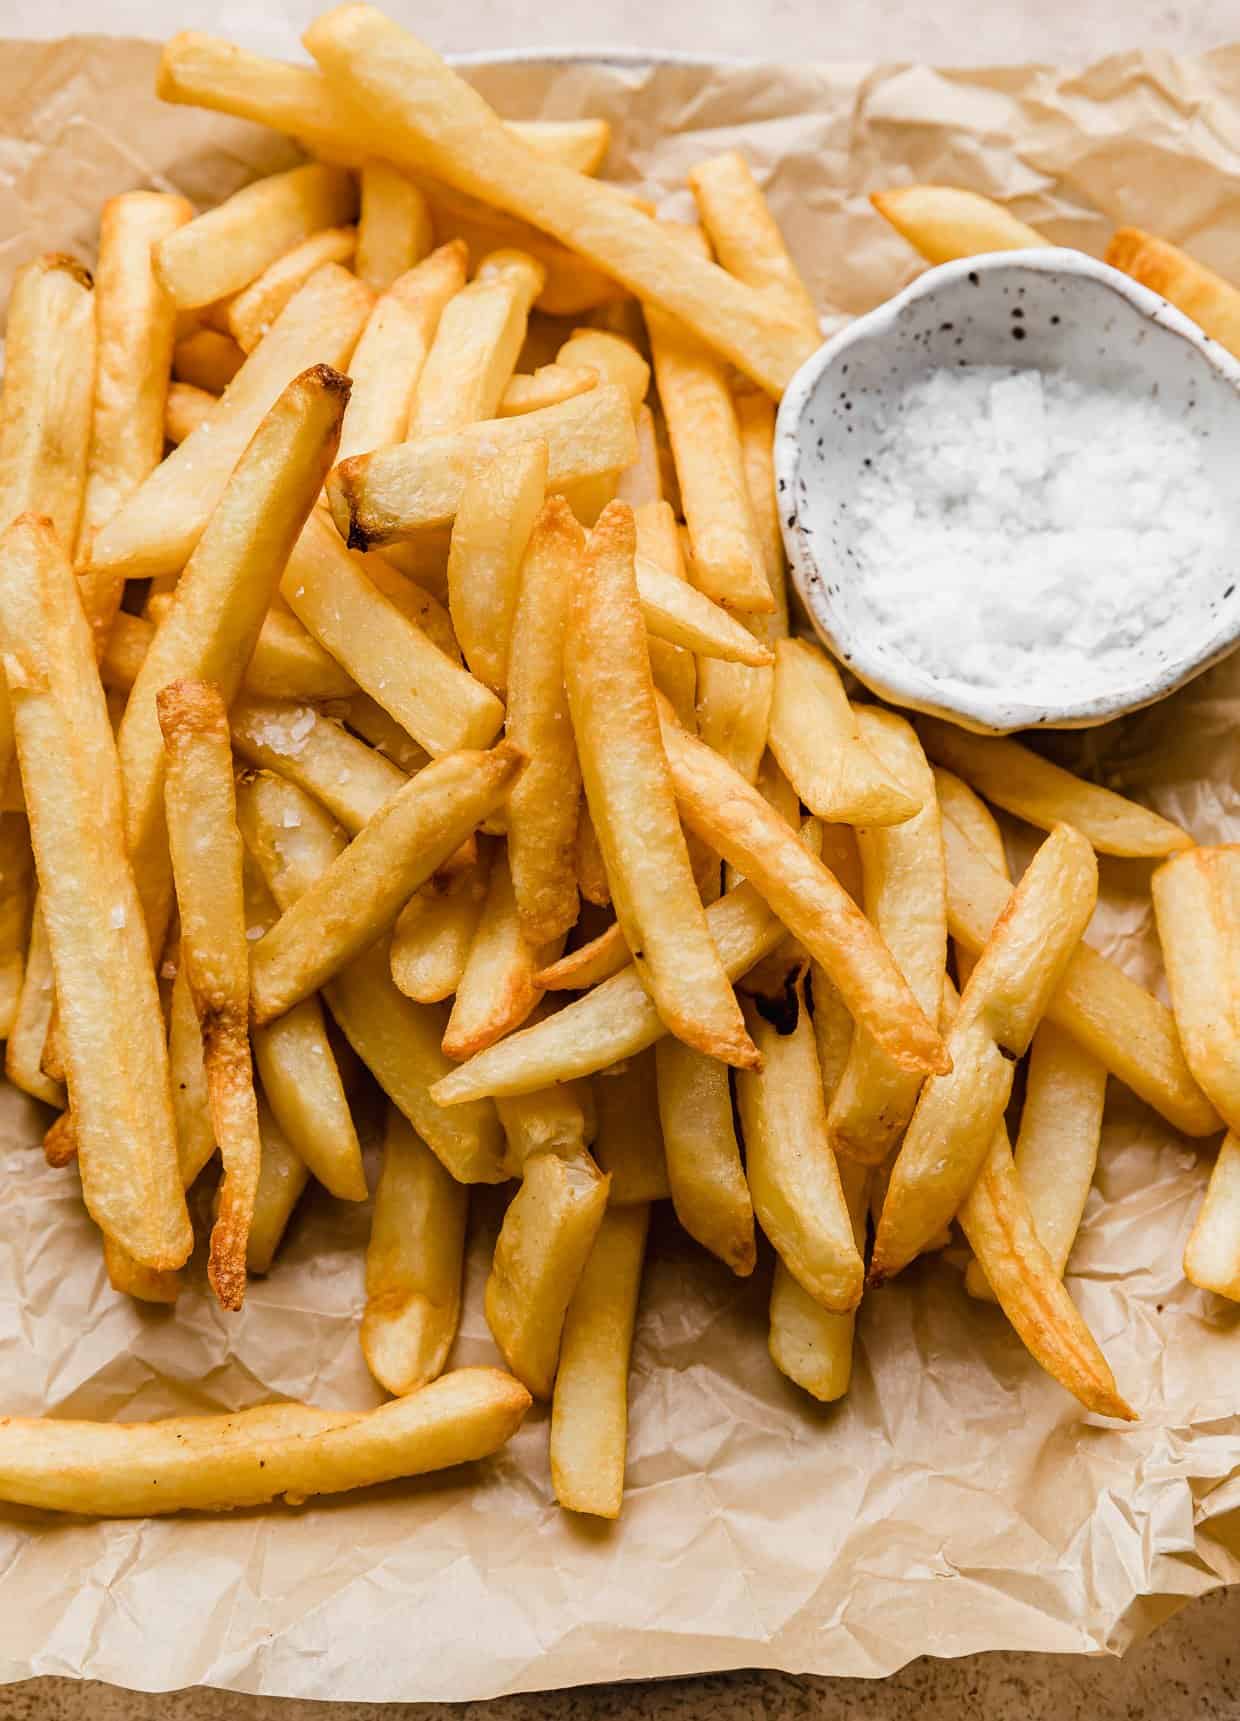 Air Fryer Frozen French Fries on a tan parchment paper with a small white bowl filled with salt.